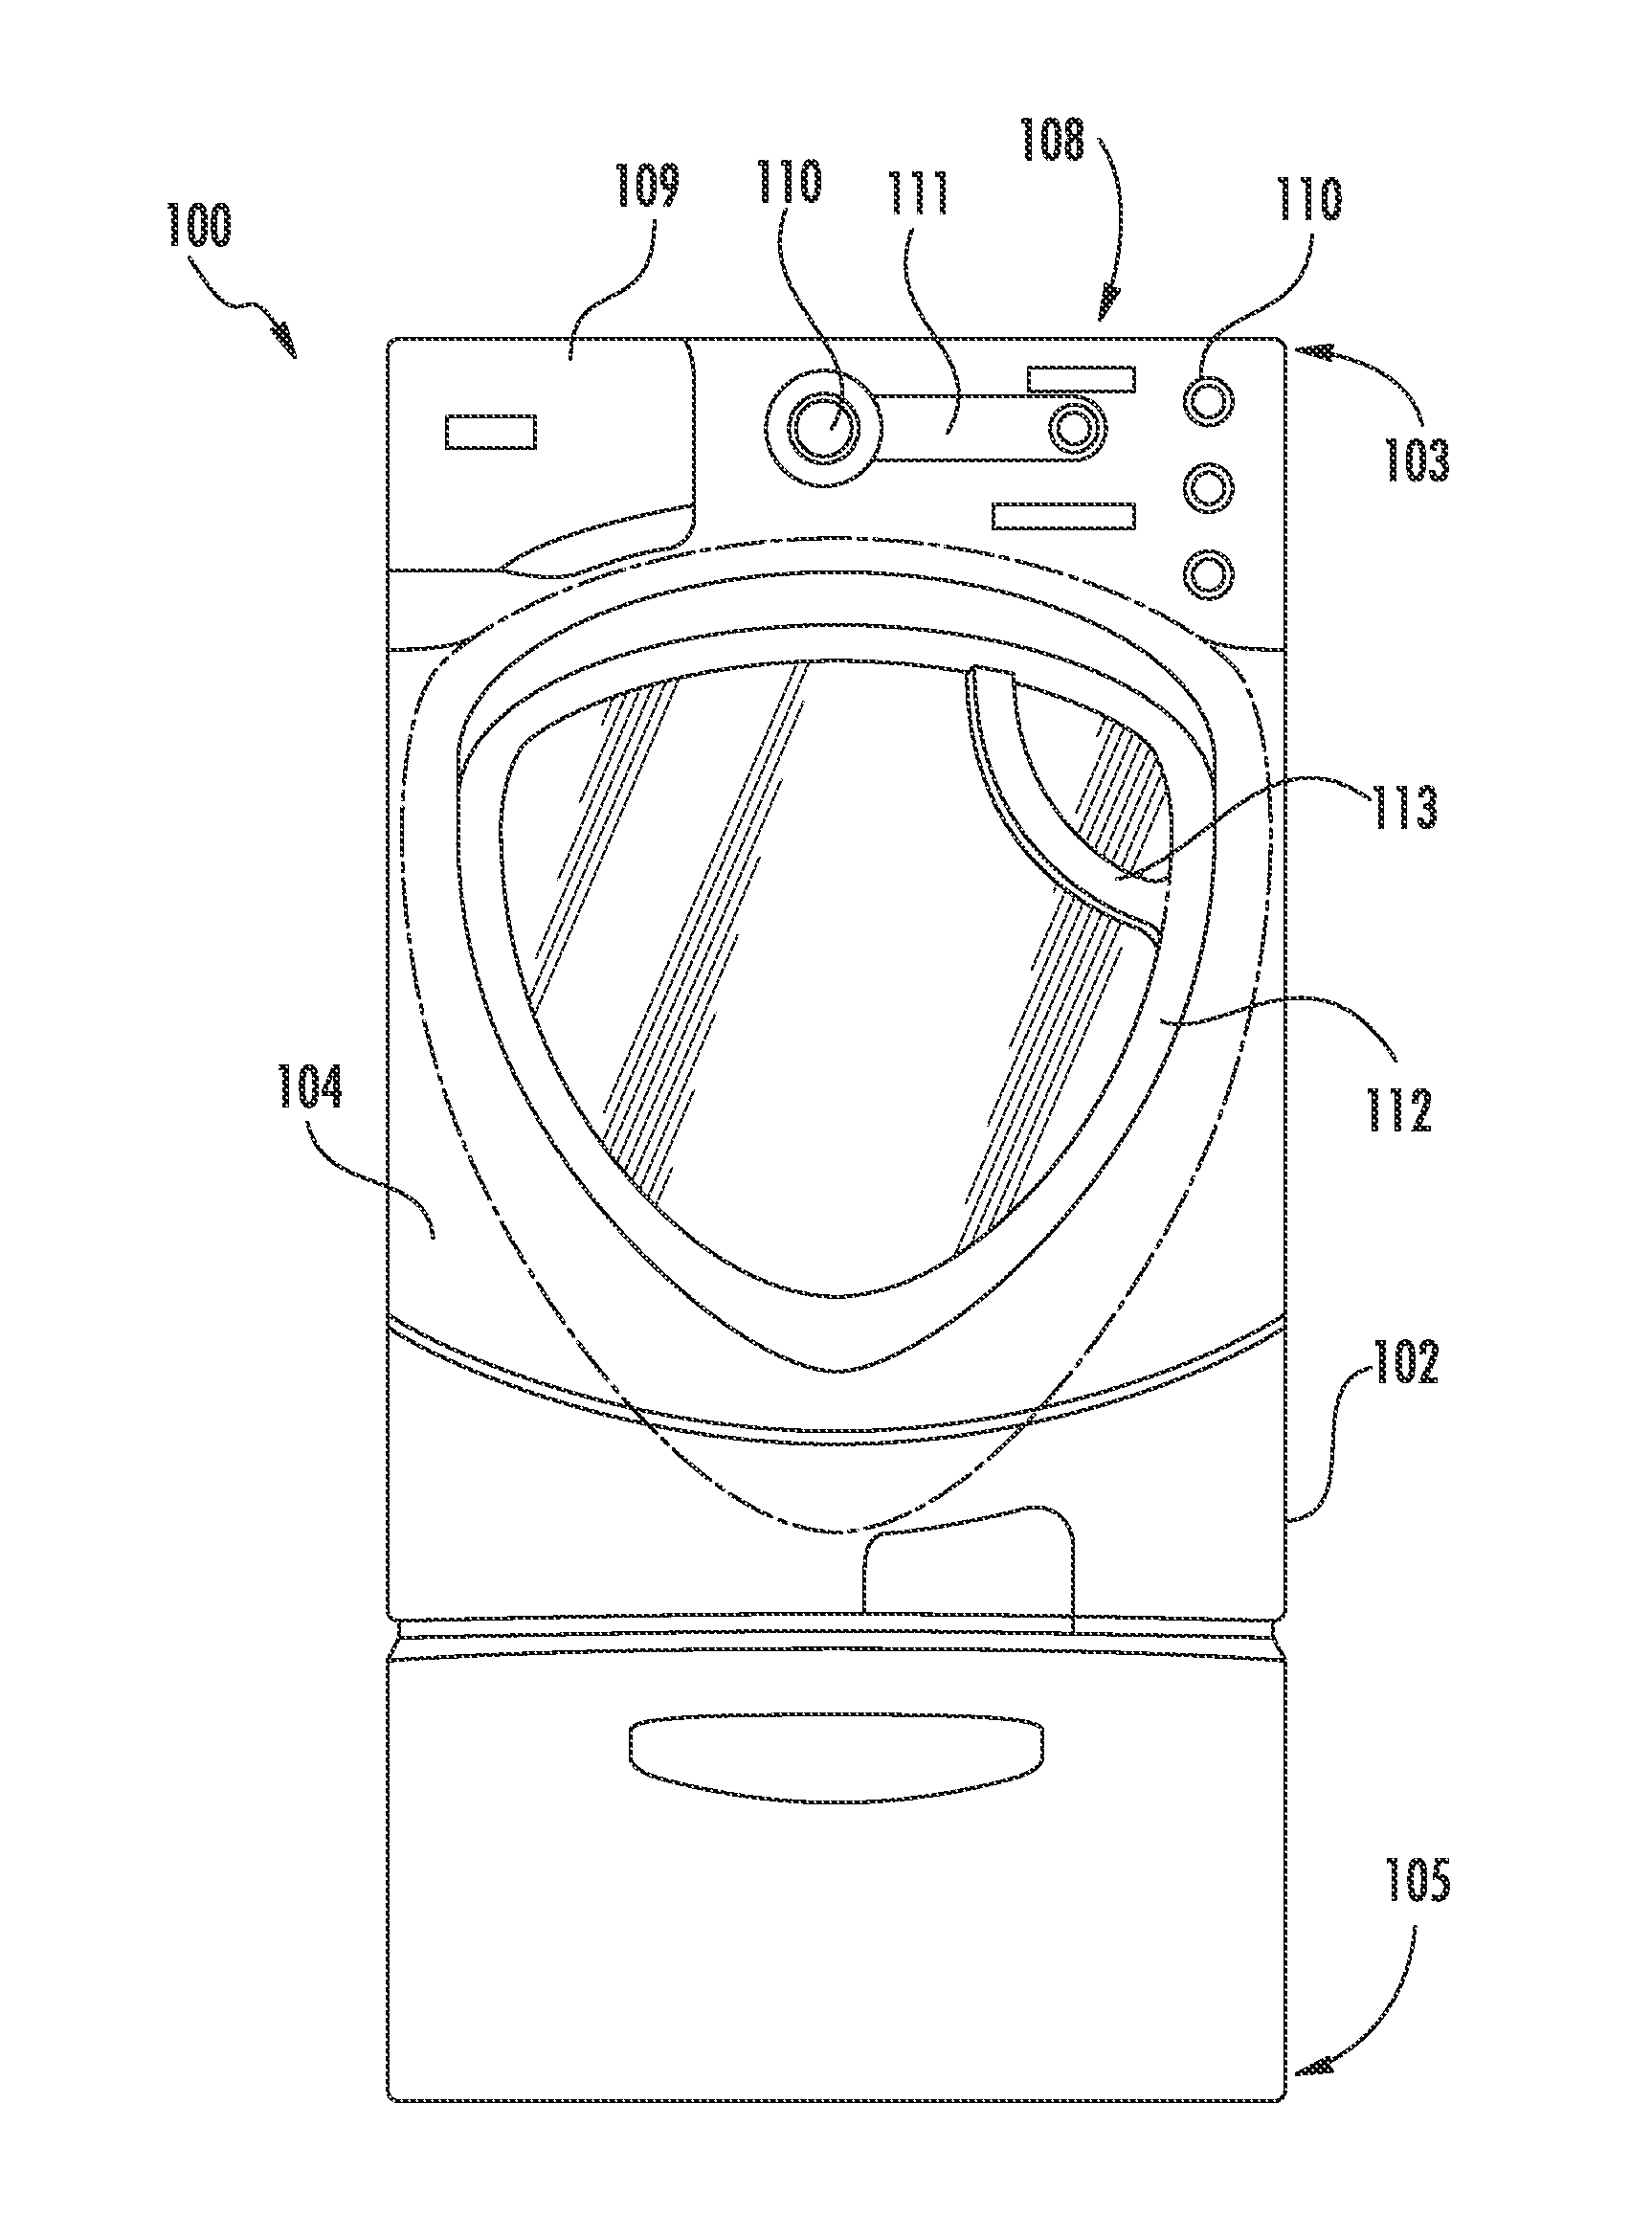 Systems and Methods for Detecting an Imbalanced Load in a Washing Machine Appliance Having a Balancing Apparatus